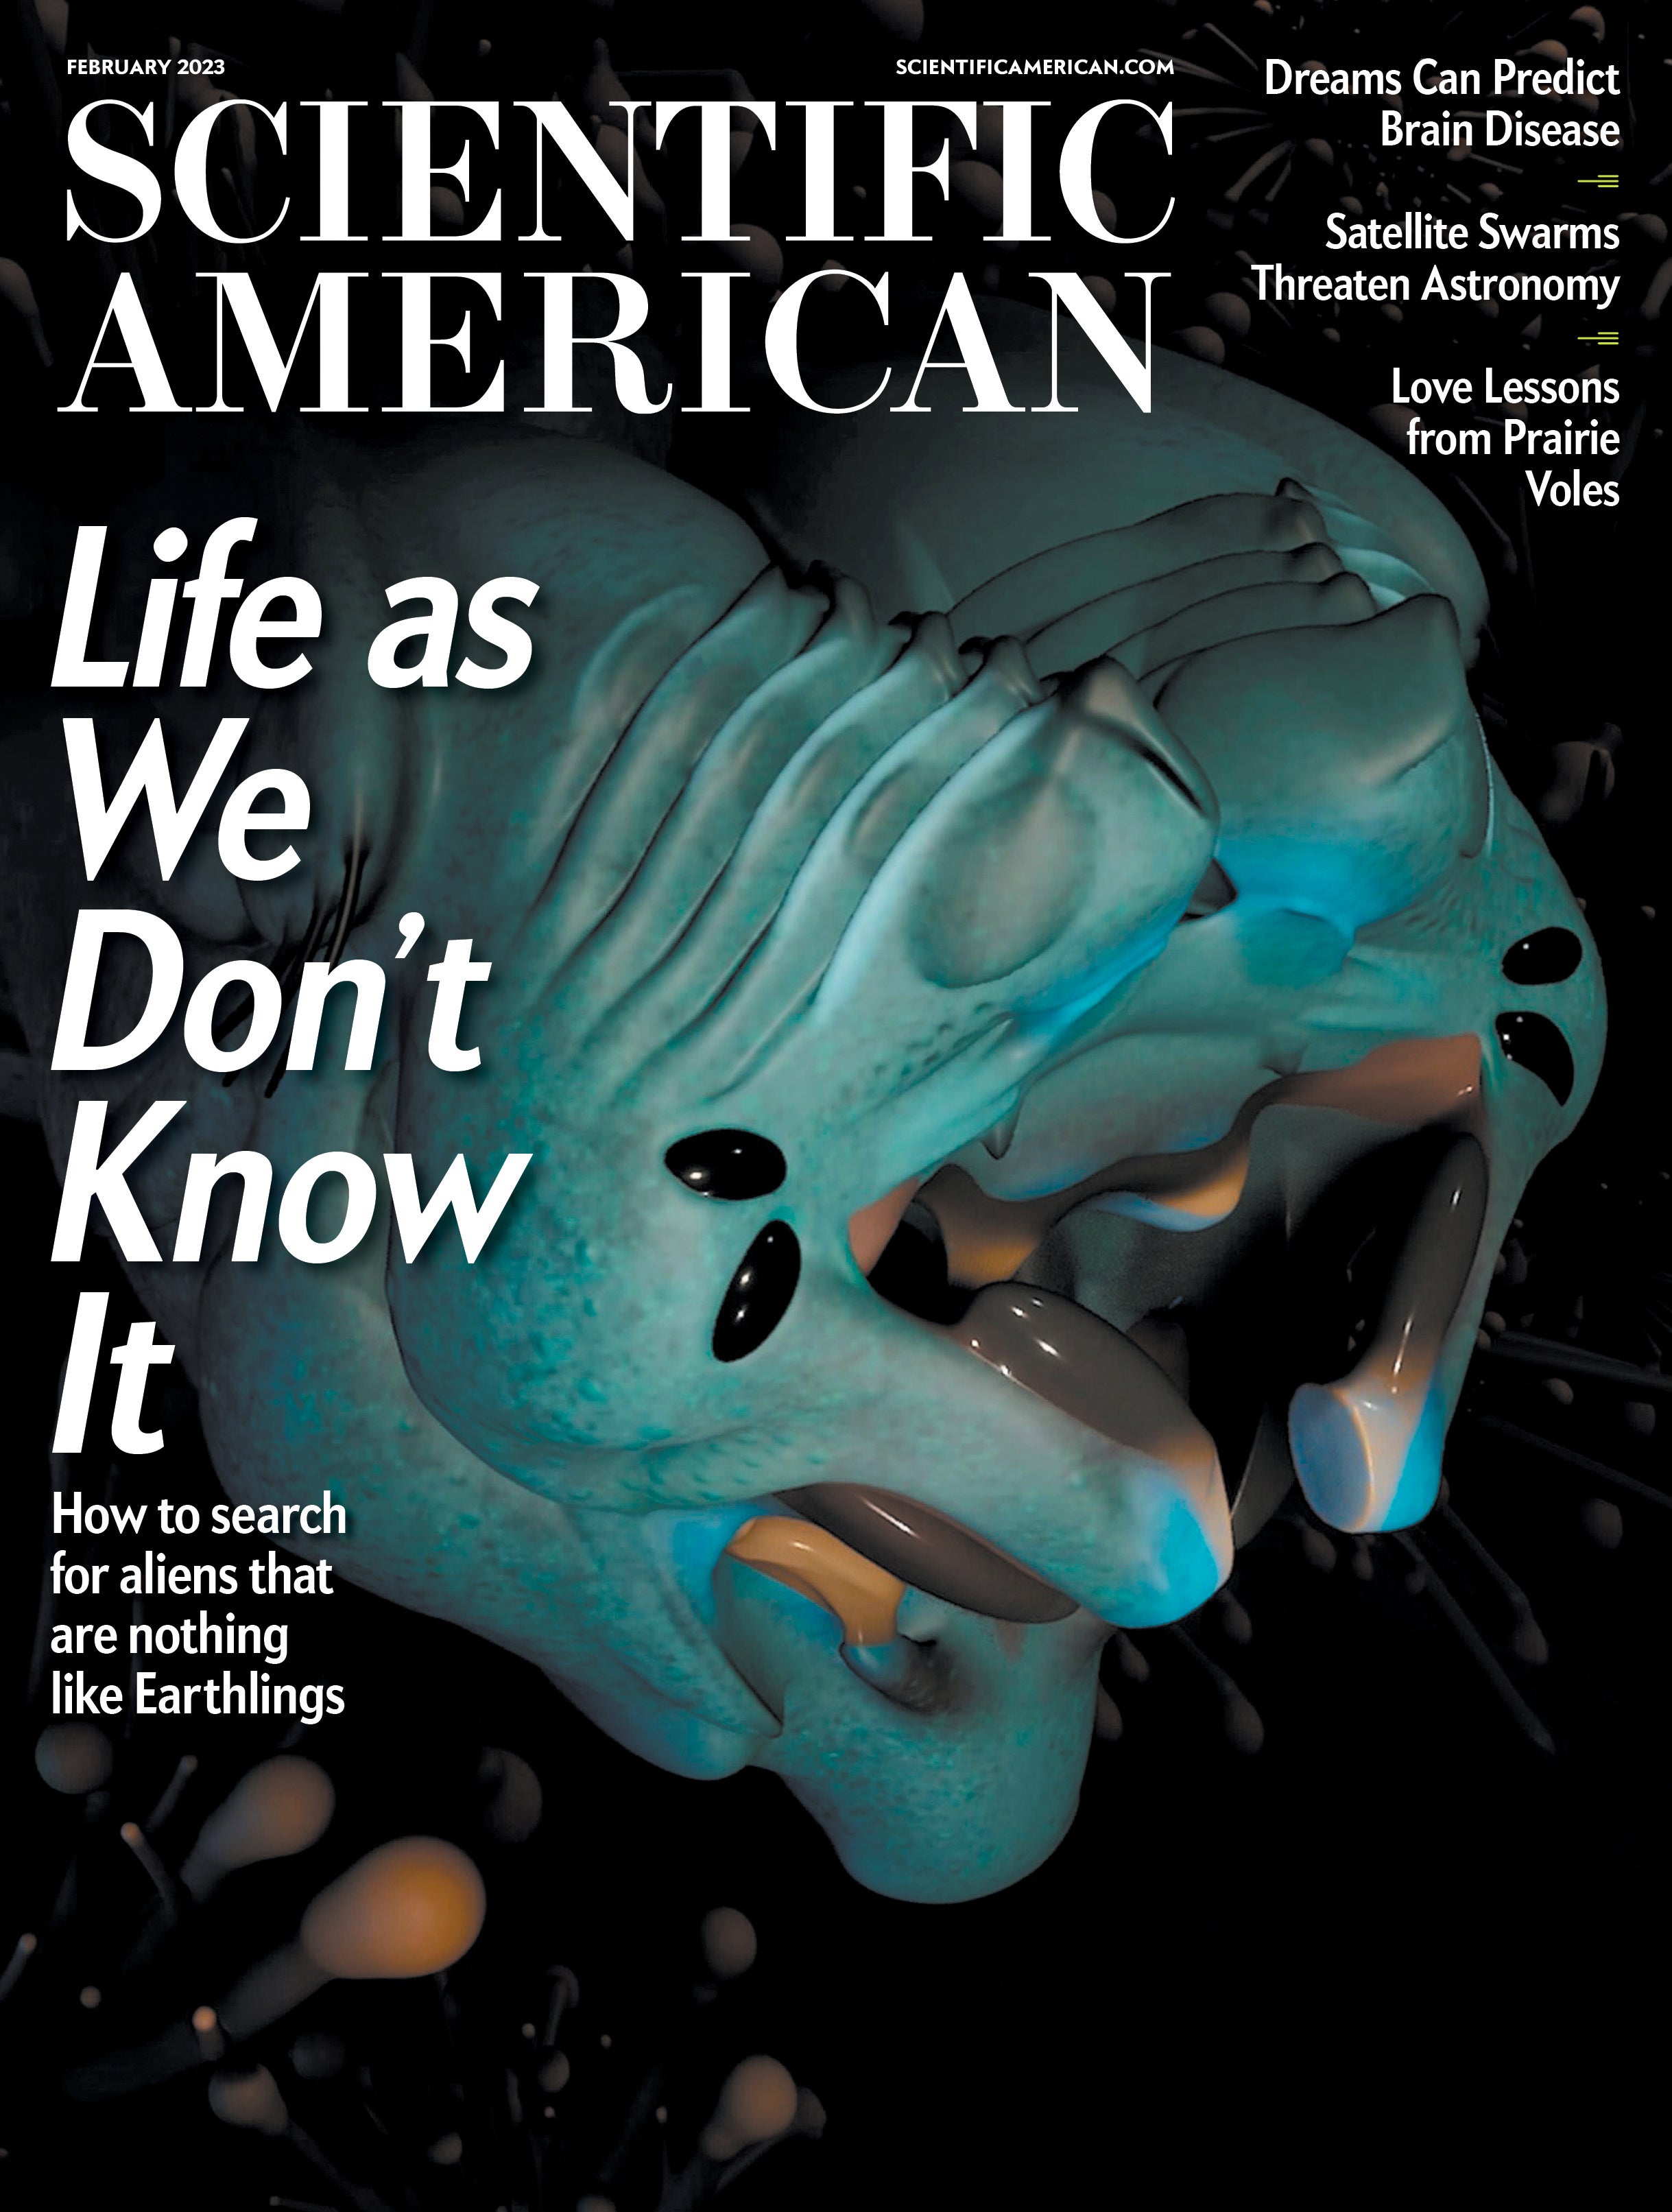 Scientific American: Life as We Don't Know It